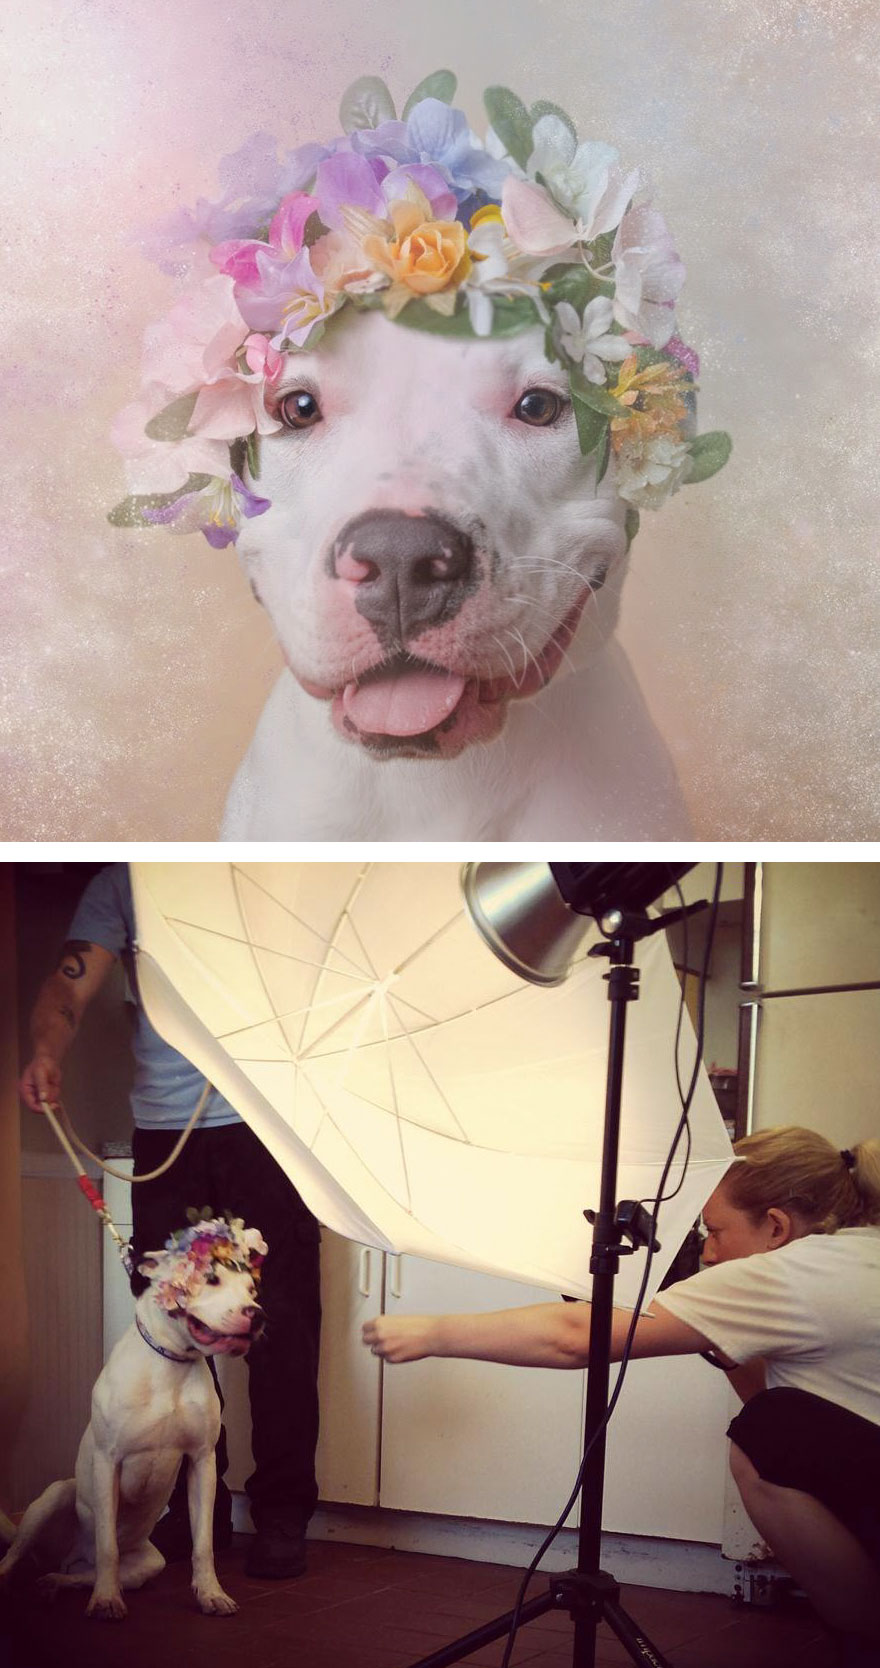 Behind The Scenes Of Pit Bull Flower Power Photoshoot